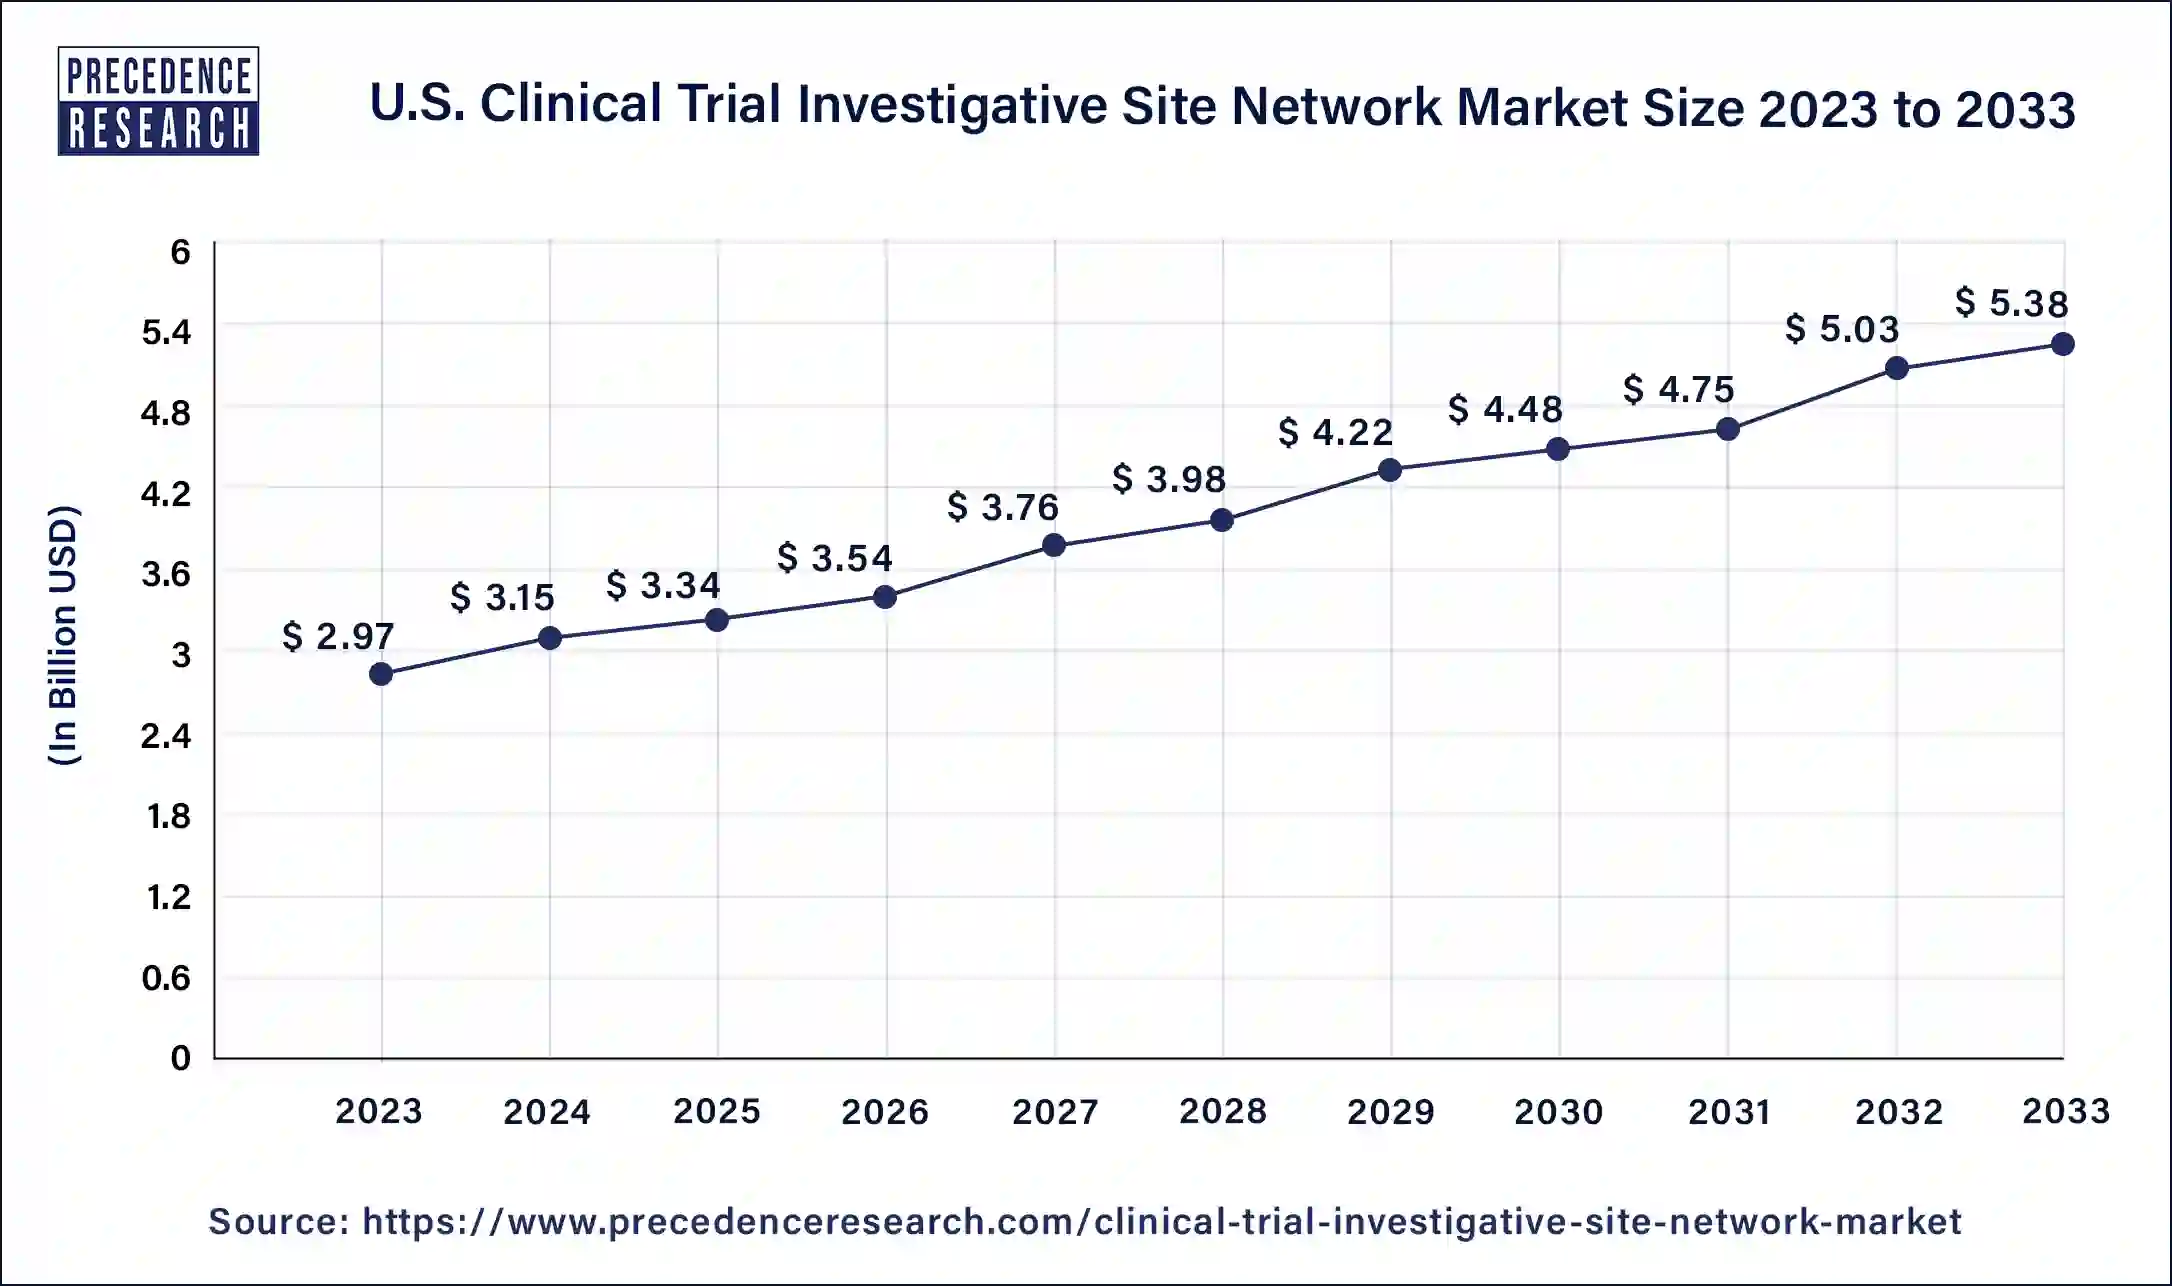 U.S. Clinical Trial Investigative Site Network Market Size 2024 to 2033